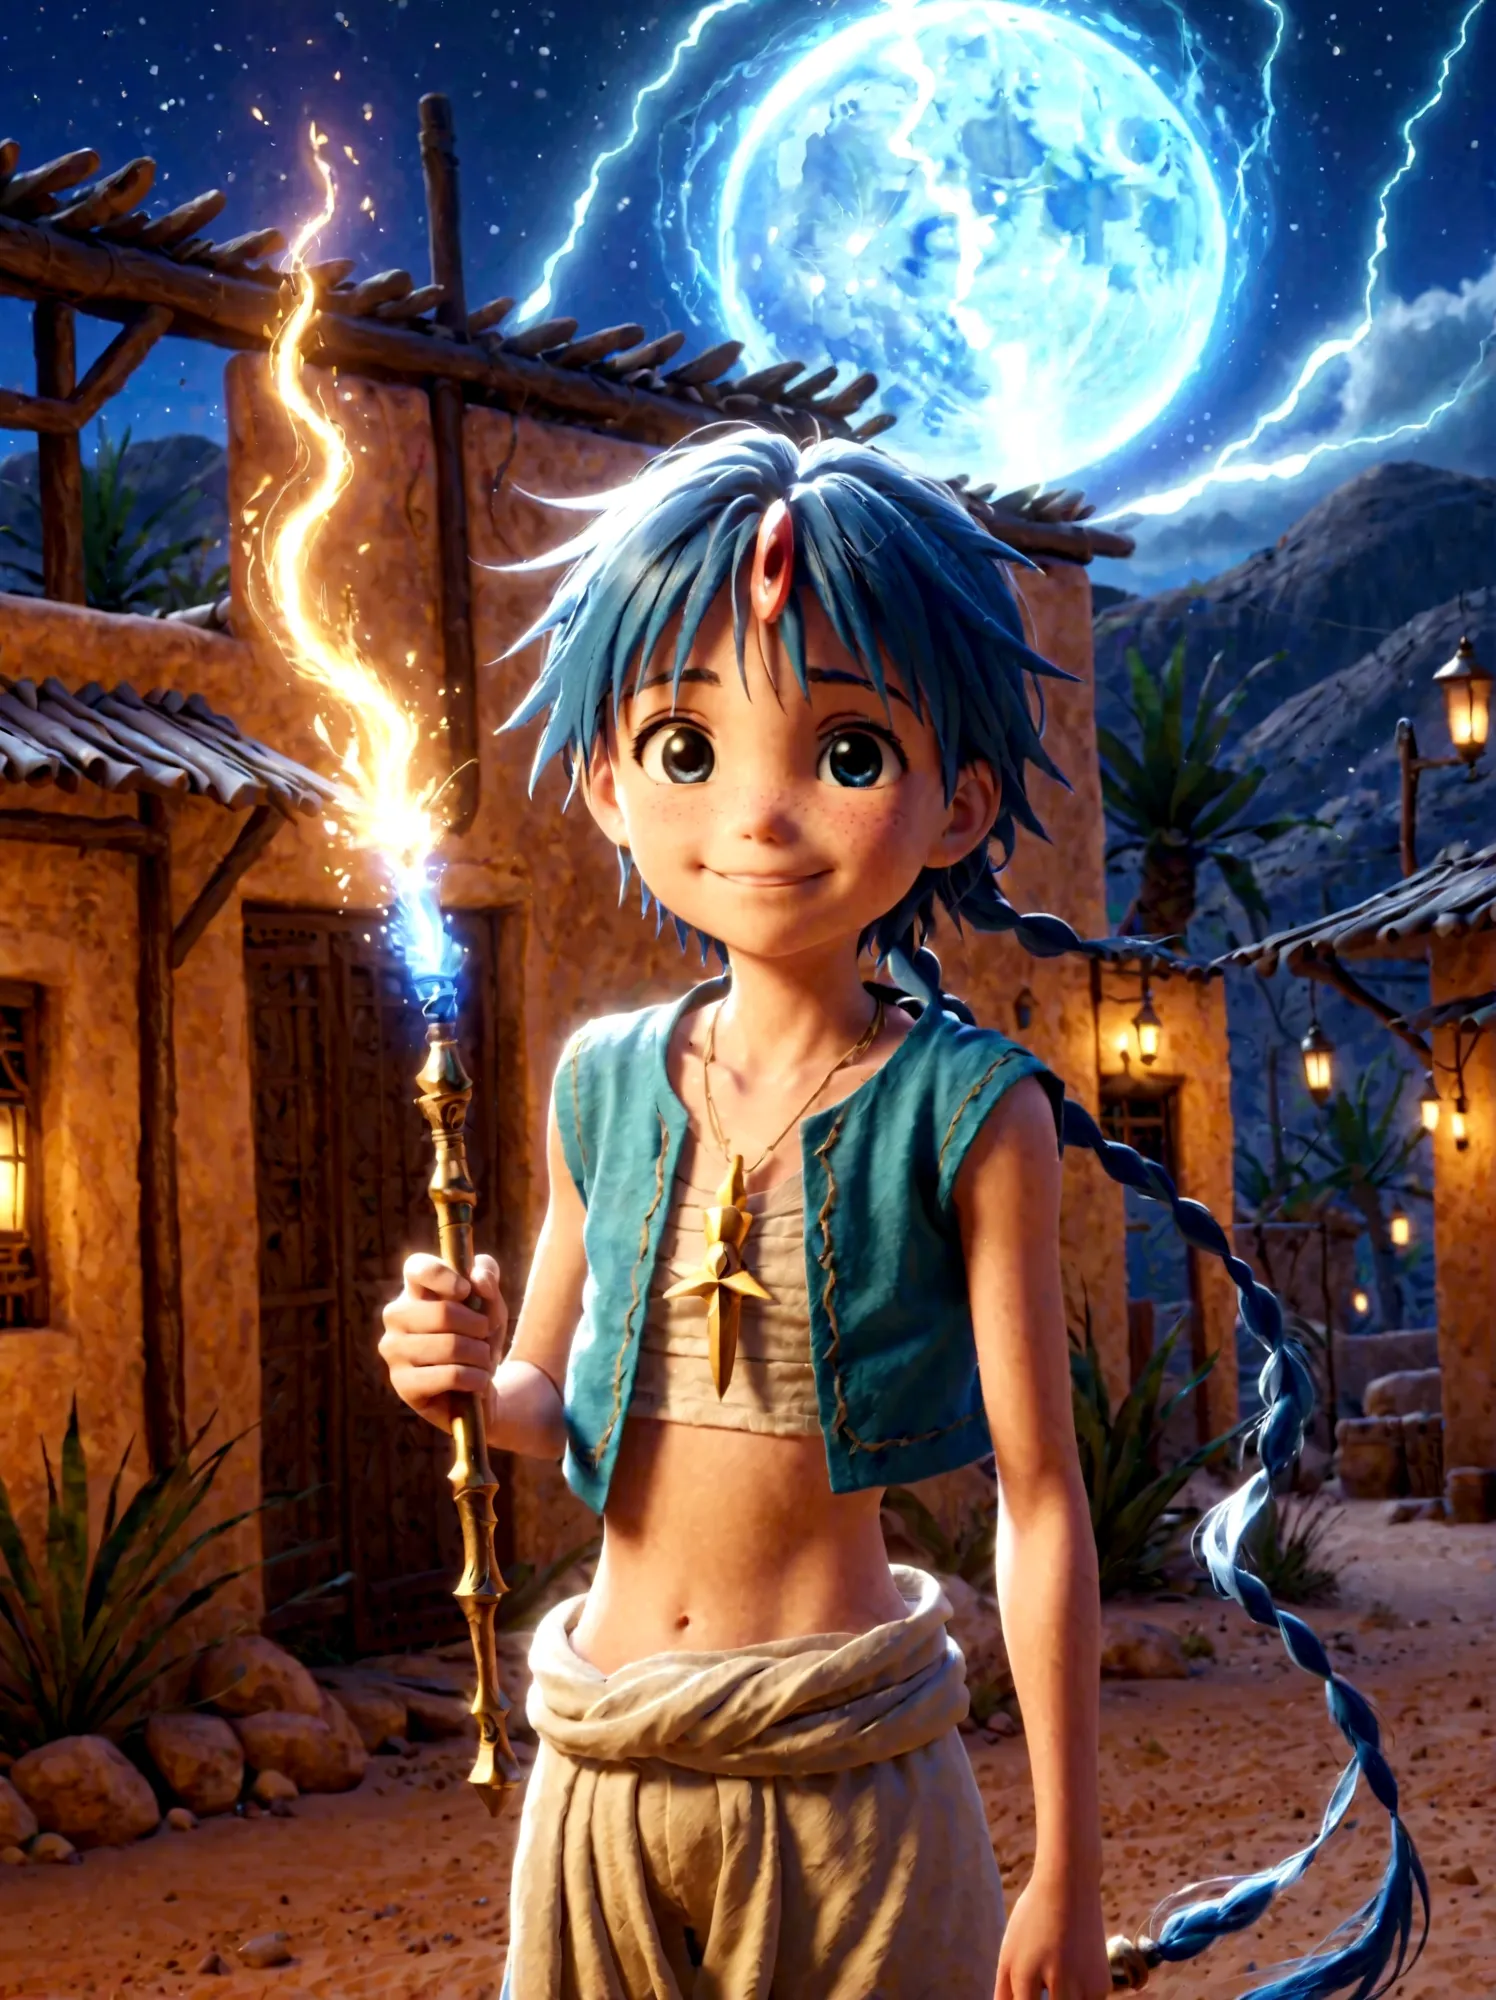 1boy，magi_aladdin，Standing alone in a desert town, He has short blue hair，With a braid，Wear a headscarf，Smiling，A flute pendant ...